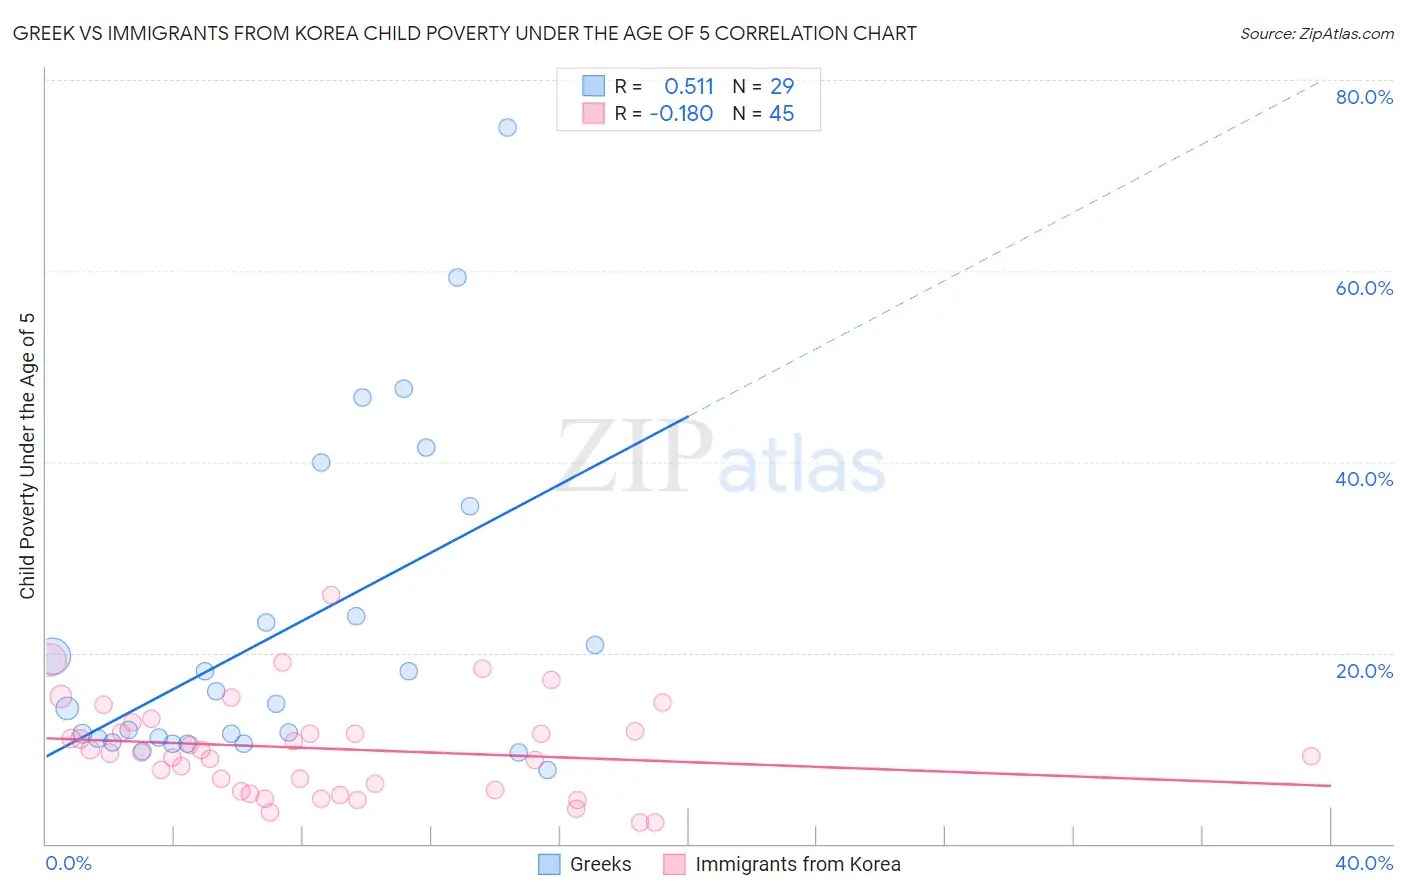 Greek vs Immigrants from Korea Child Poverty Under the Age of 5